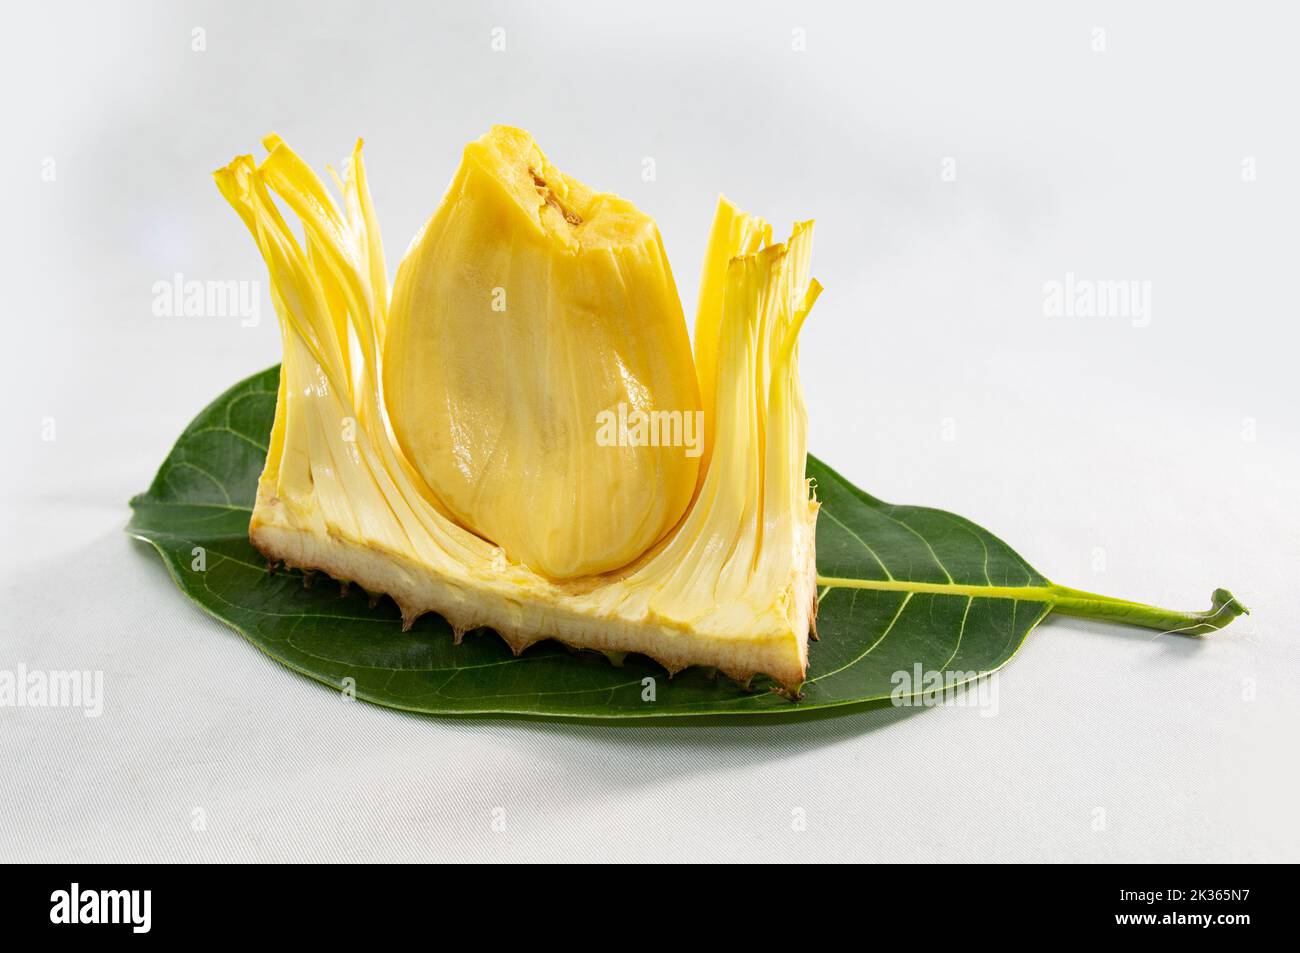 Single core of jackfruit displayed on jackfruit leave on white background. A popular summer fruit in Asia. Stock Photo